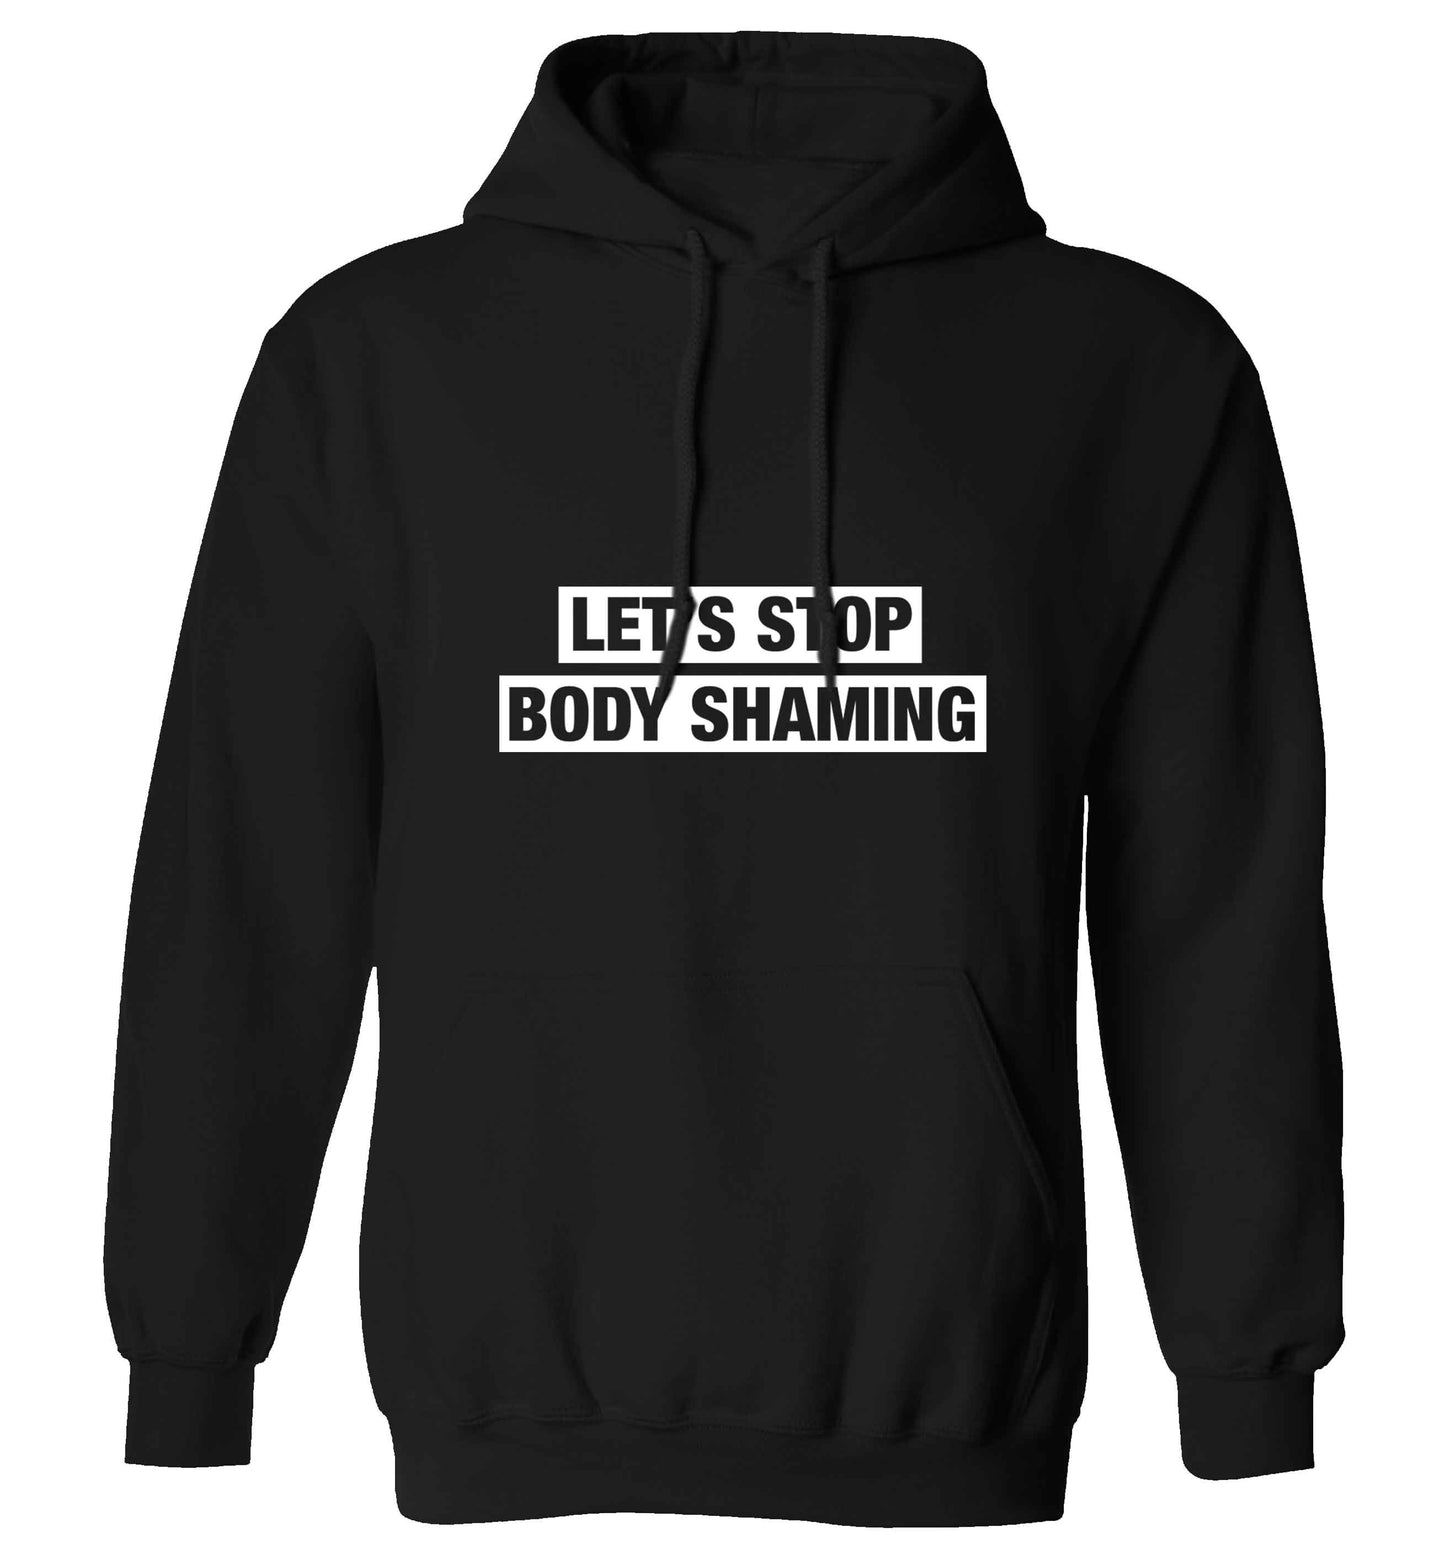 Let's stop body shaming adults unisex black hoodie 2XL